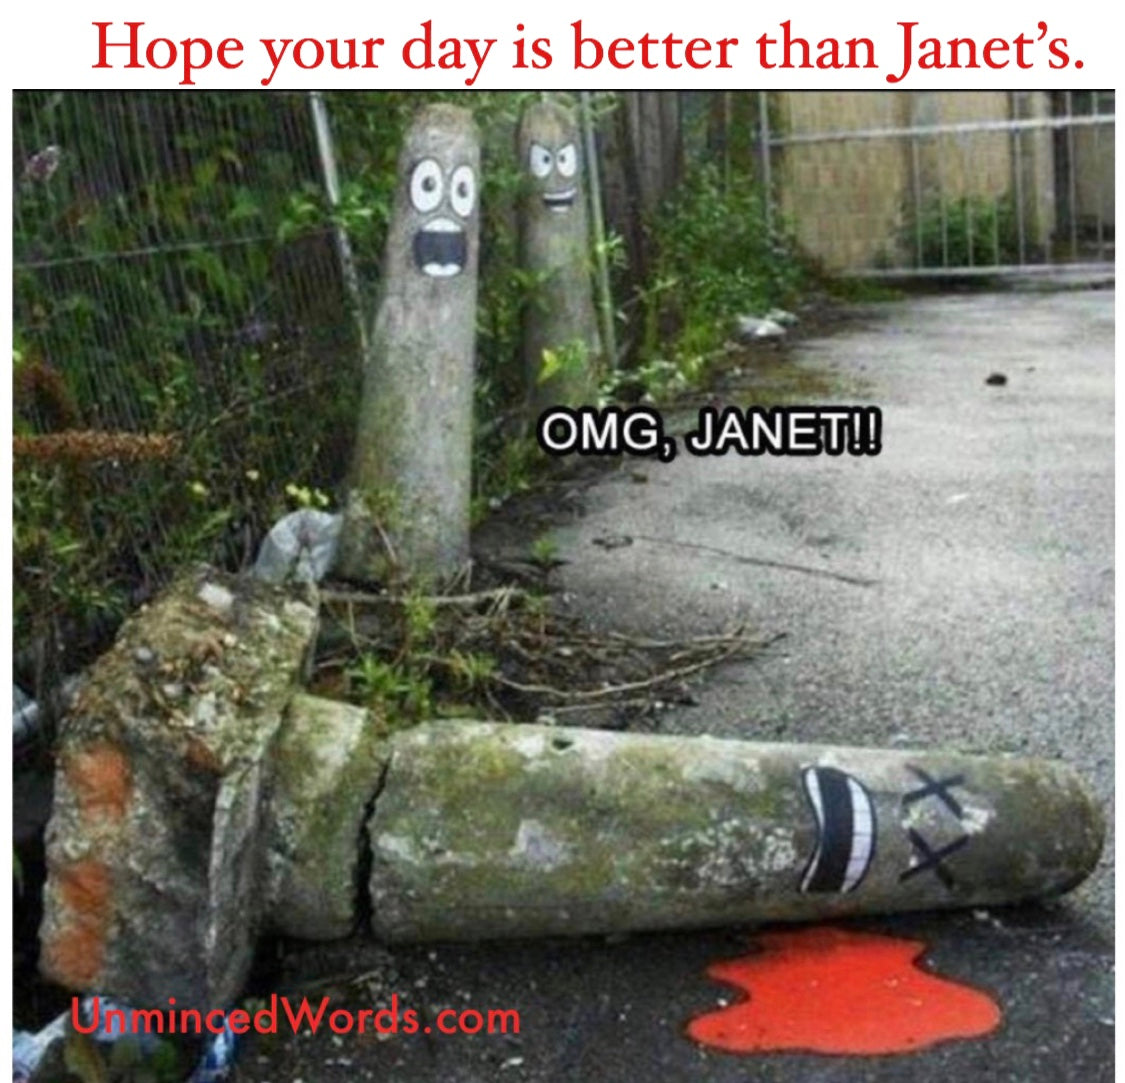 Hope Your Day Is Better Than Janet’s